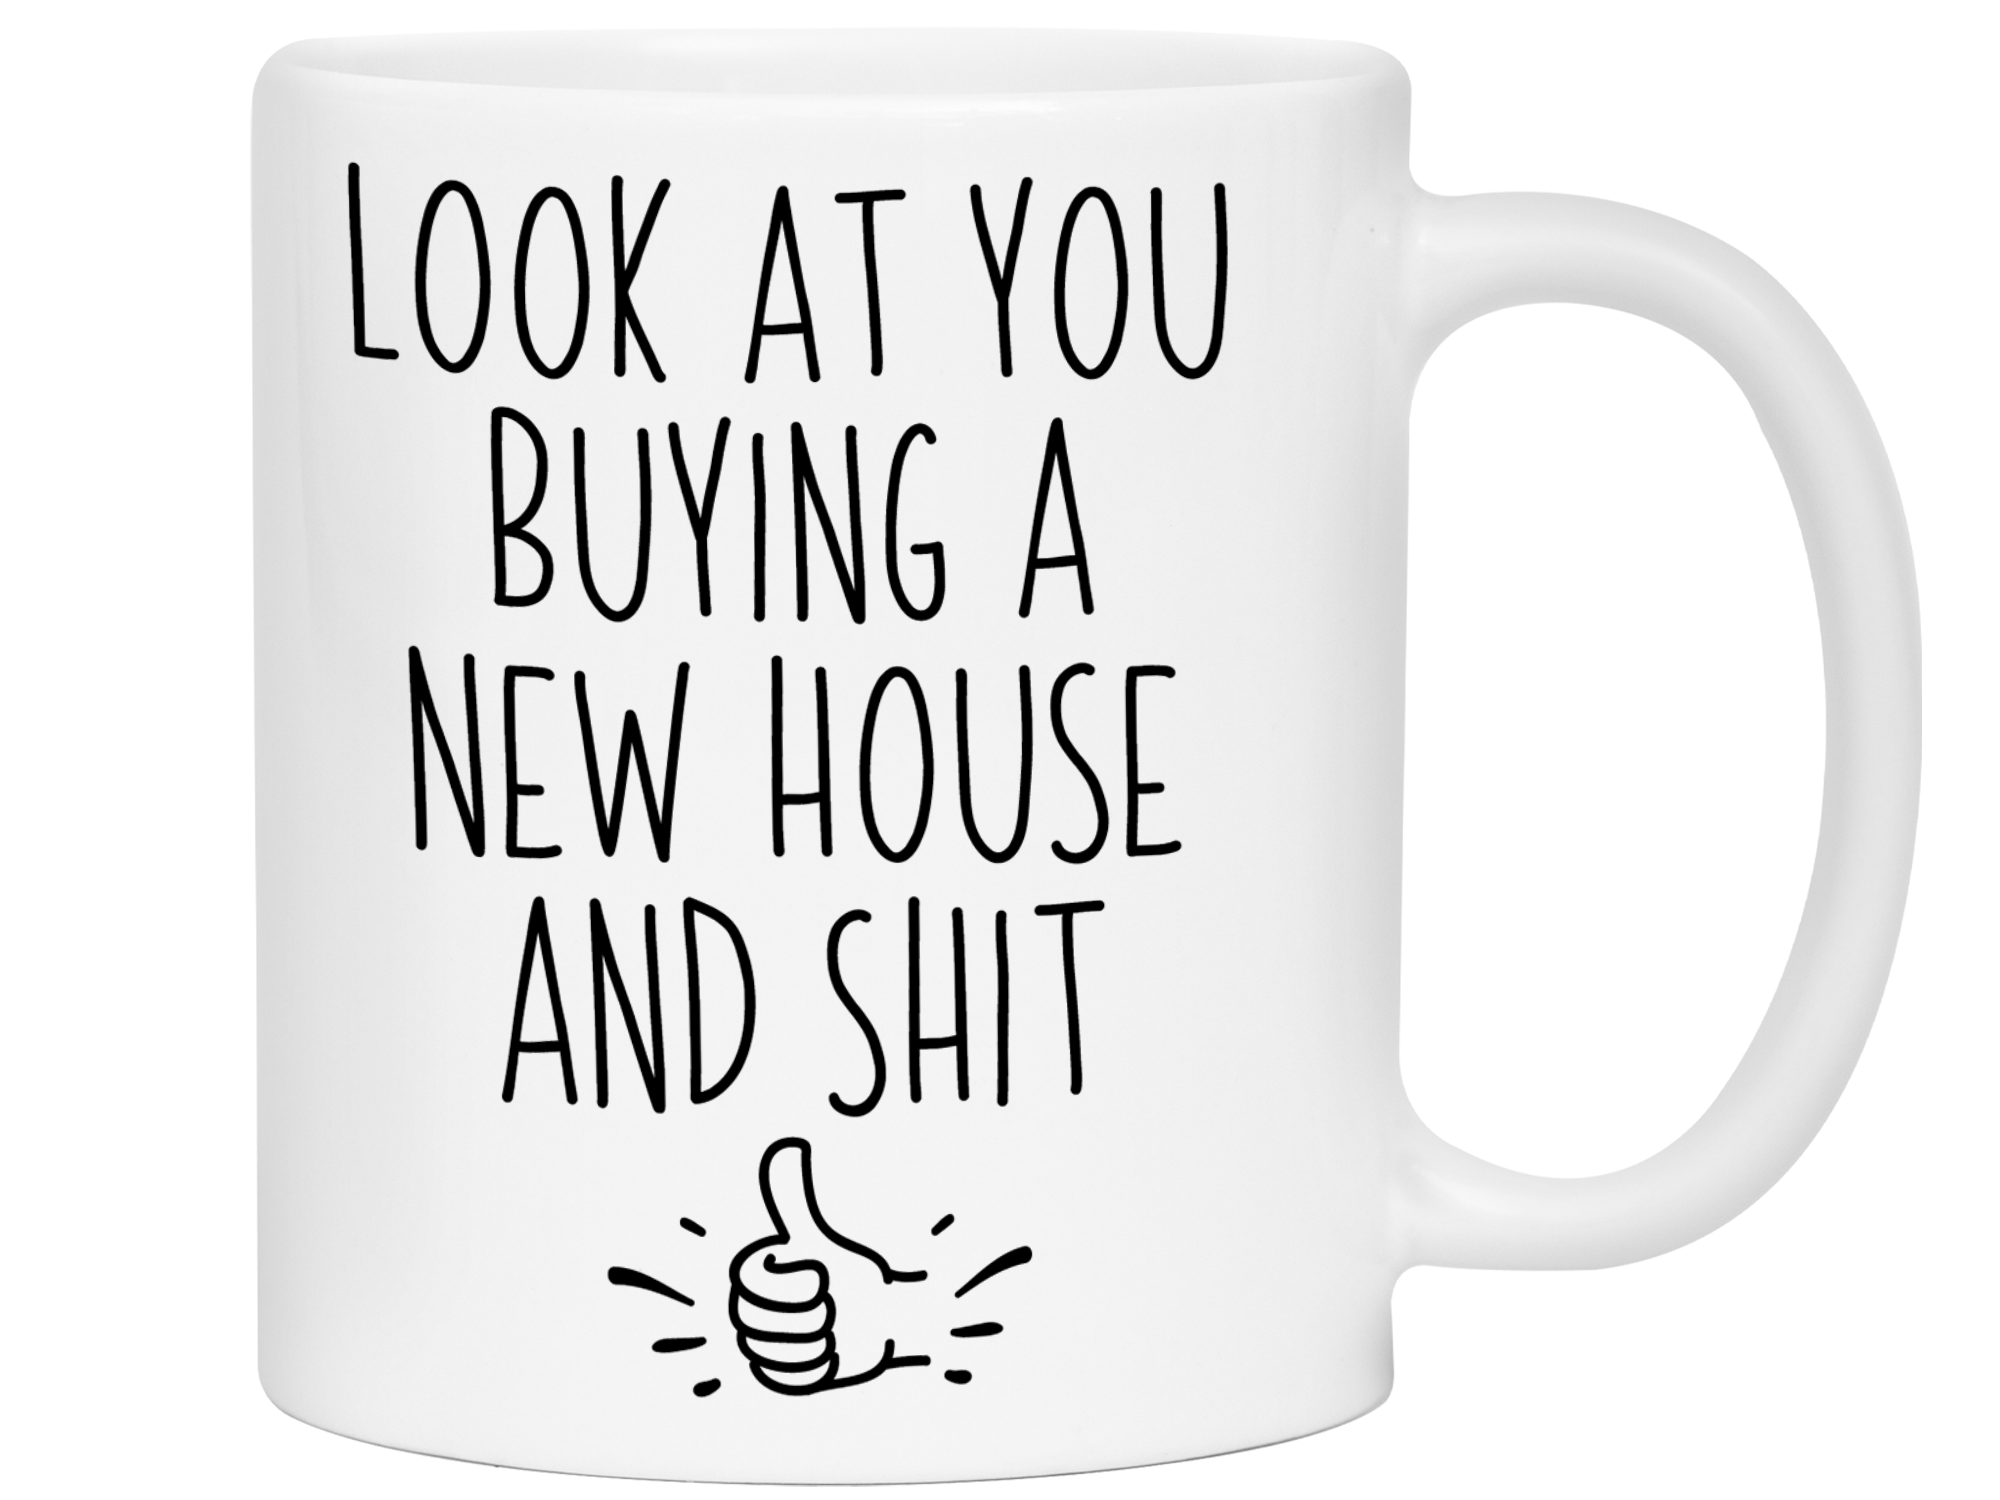 New House Owner Gifts - Look at You Buying a New House and Shit Funny Coffee Mug - Housewarming Gift Idea